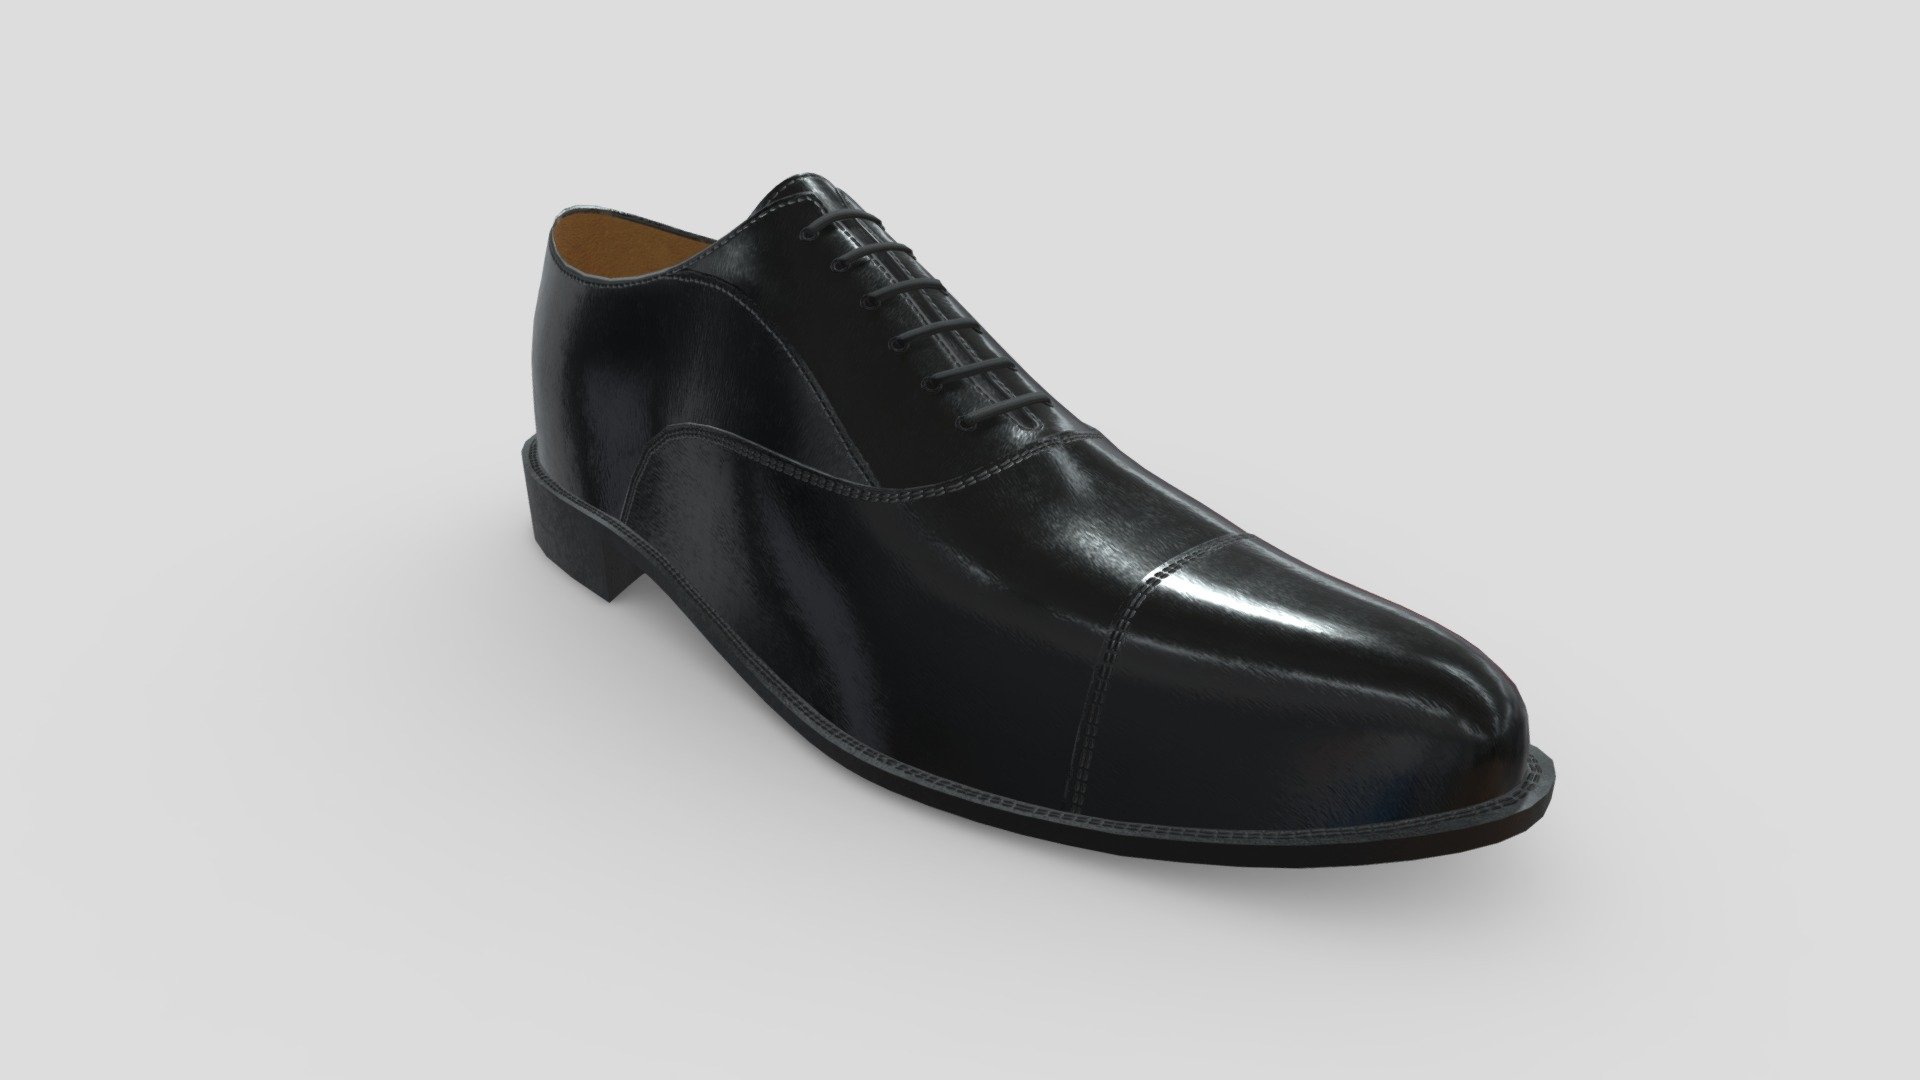 low poly 3d model of shoe - Oxford style leather shoe for men - Buy Royalty Free 3D model by assetfactory 3d model